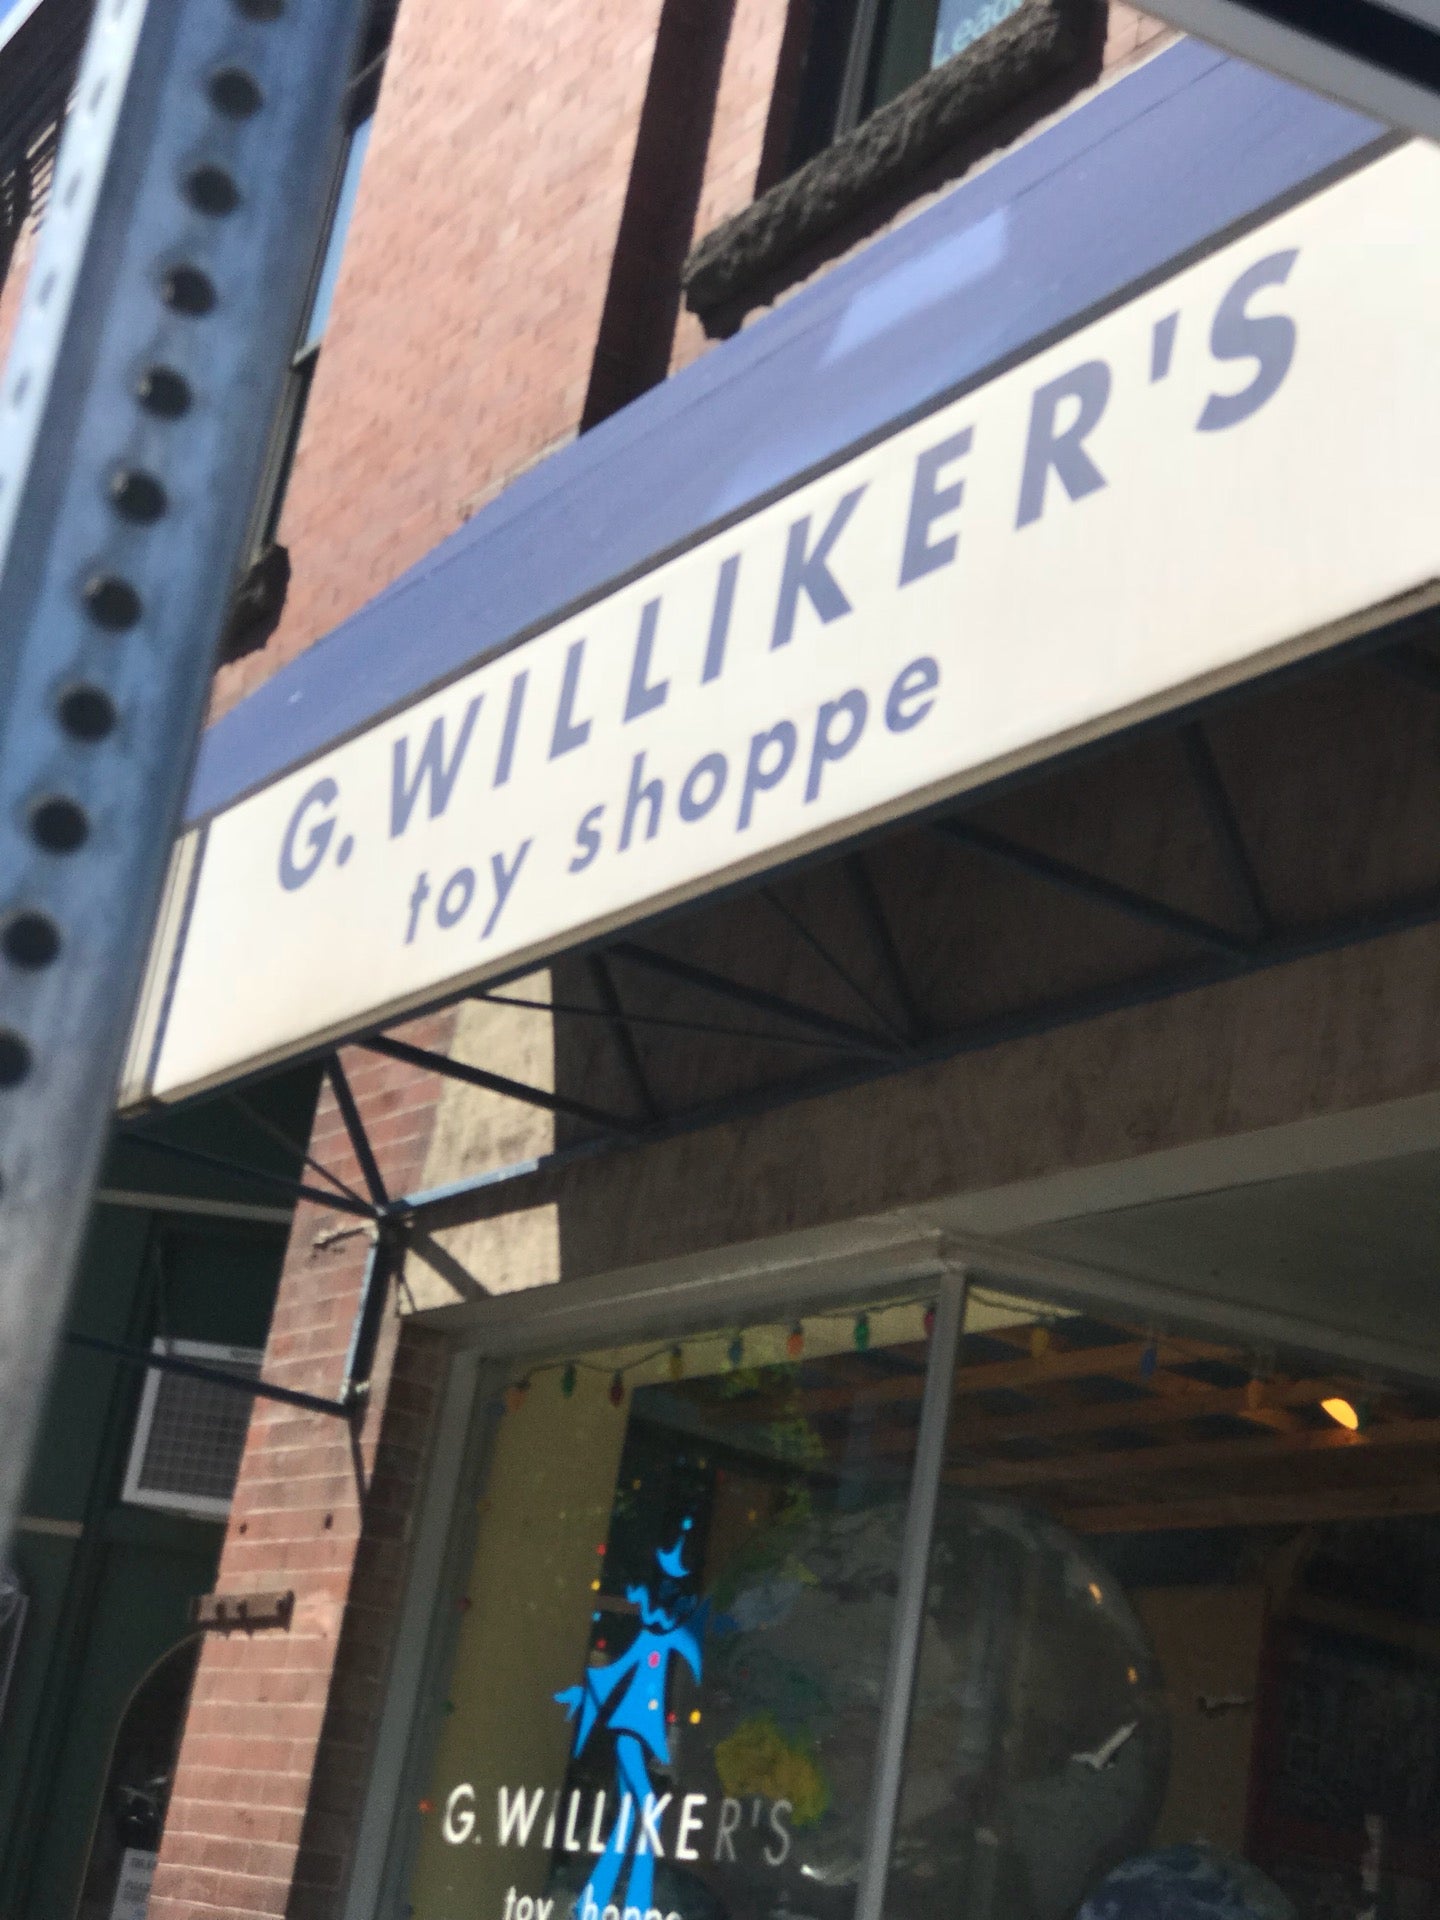 G. Willikers Toy Shoppe